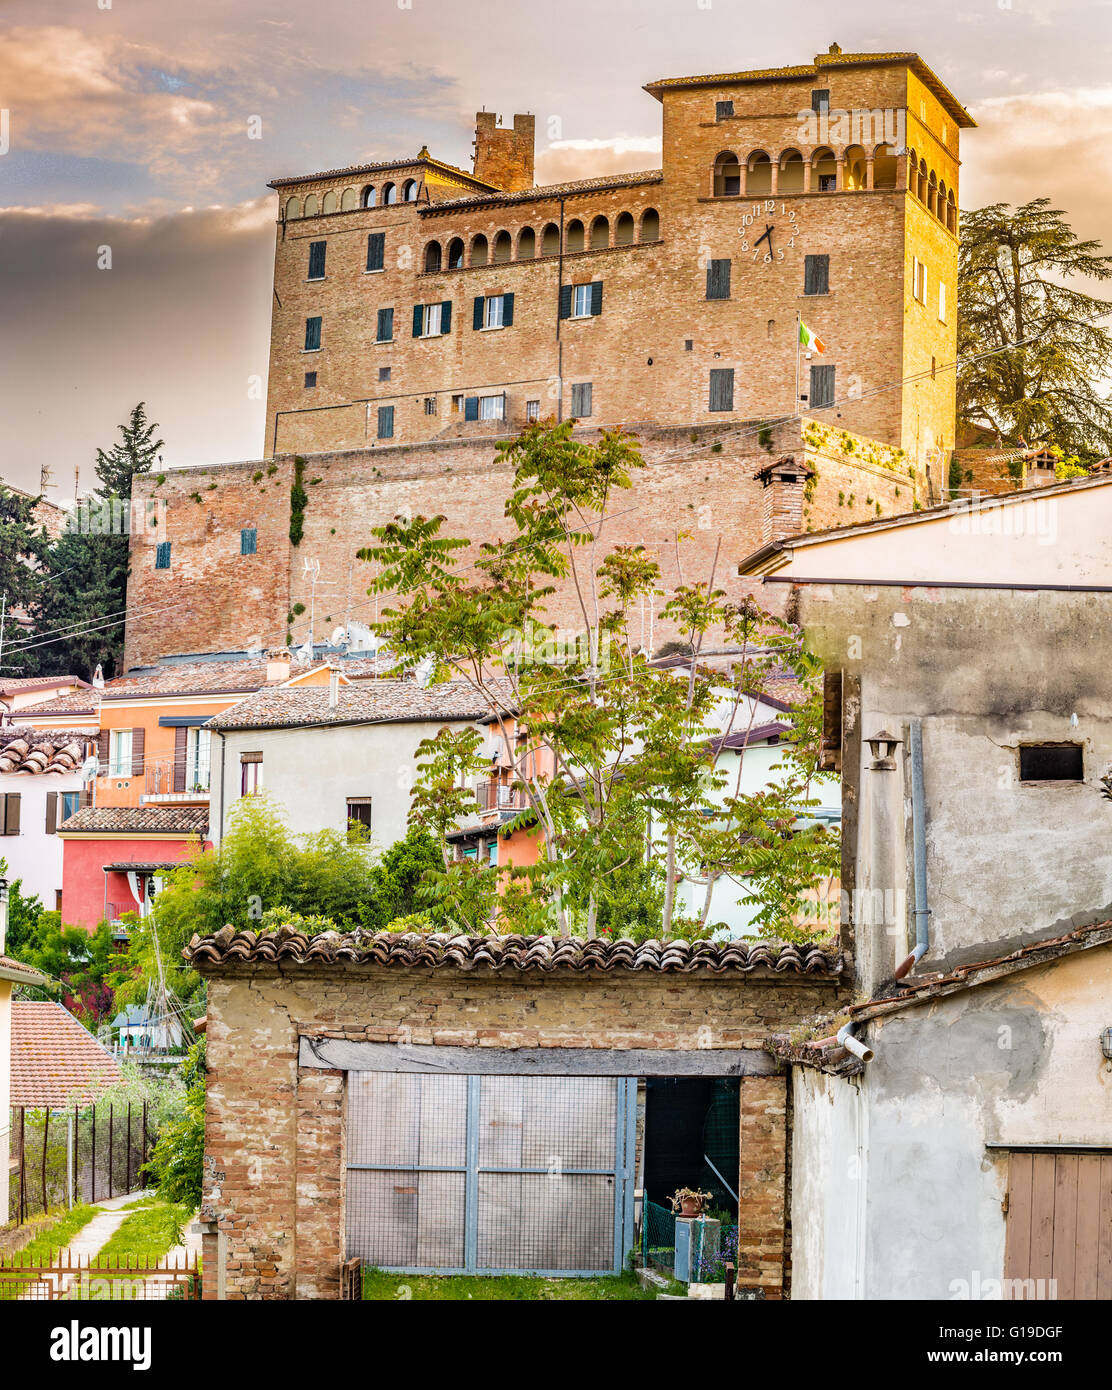 the medieval castle overlooking the colorful houses of the charming mountain town of Longiano, near Cesena, Italy Stock Photo